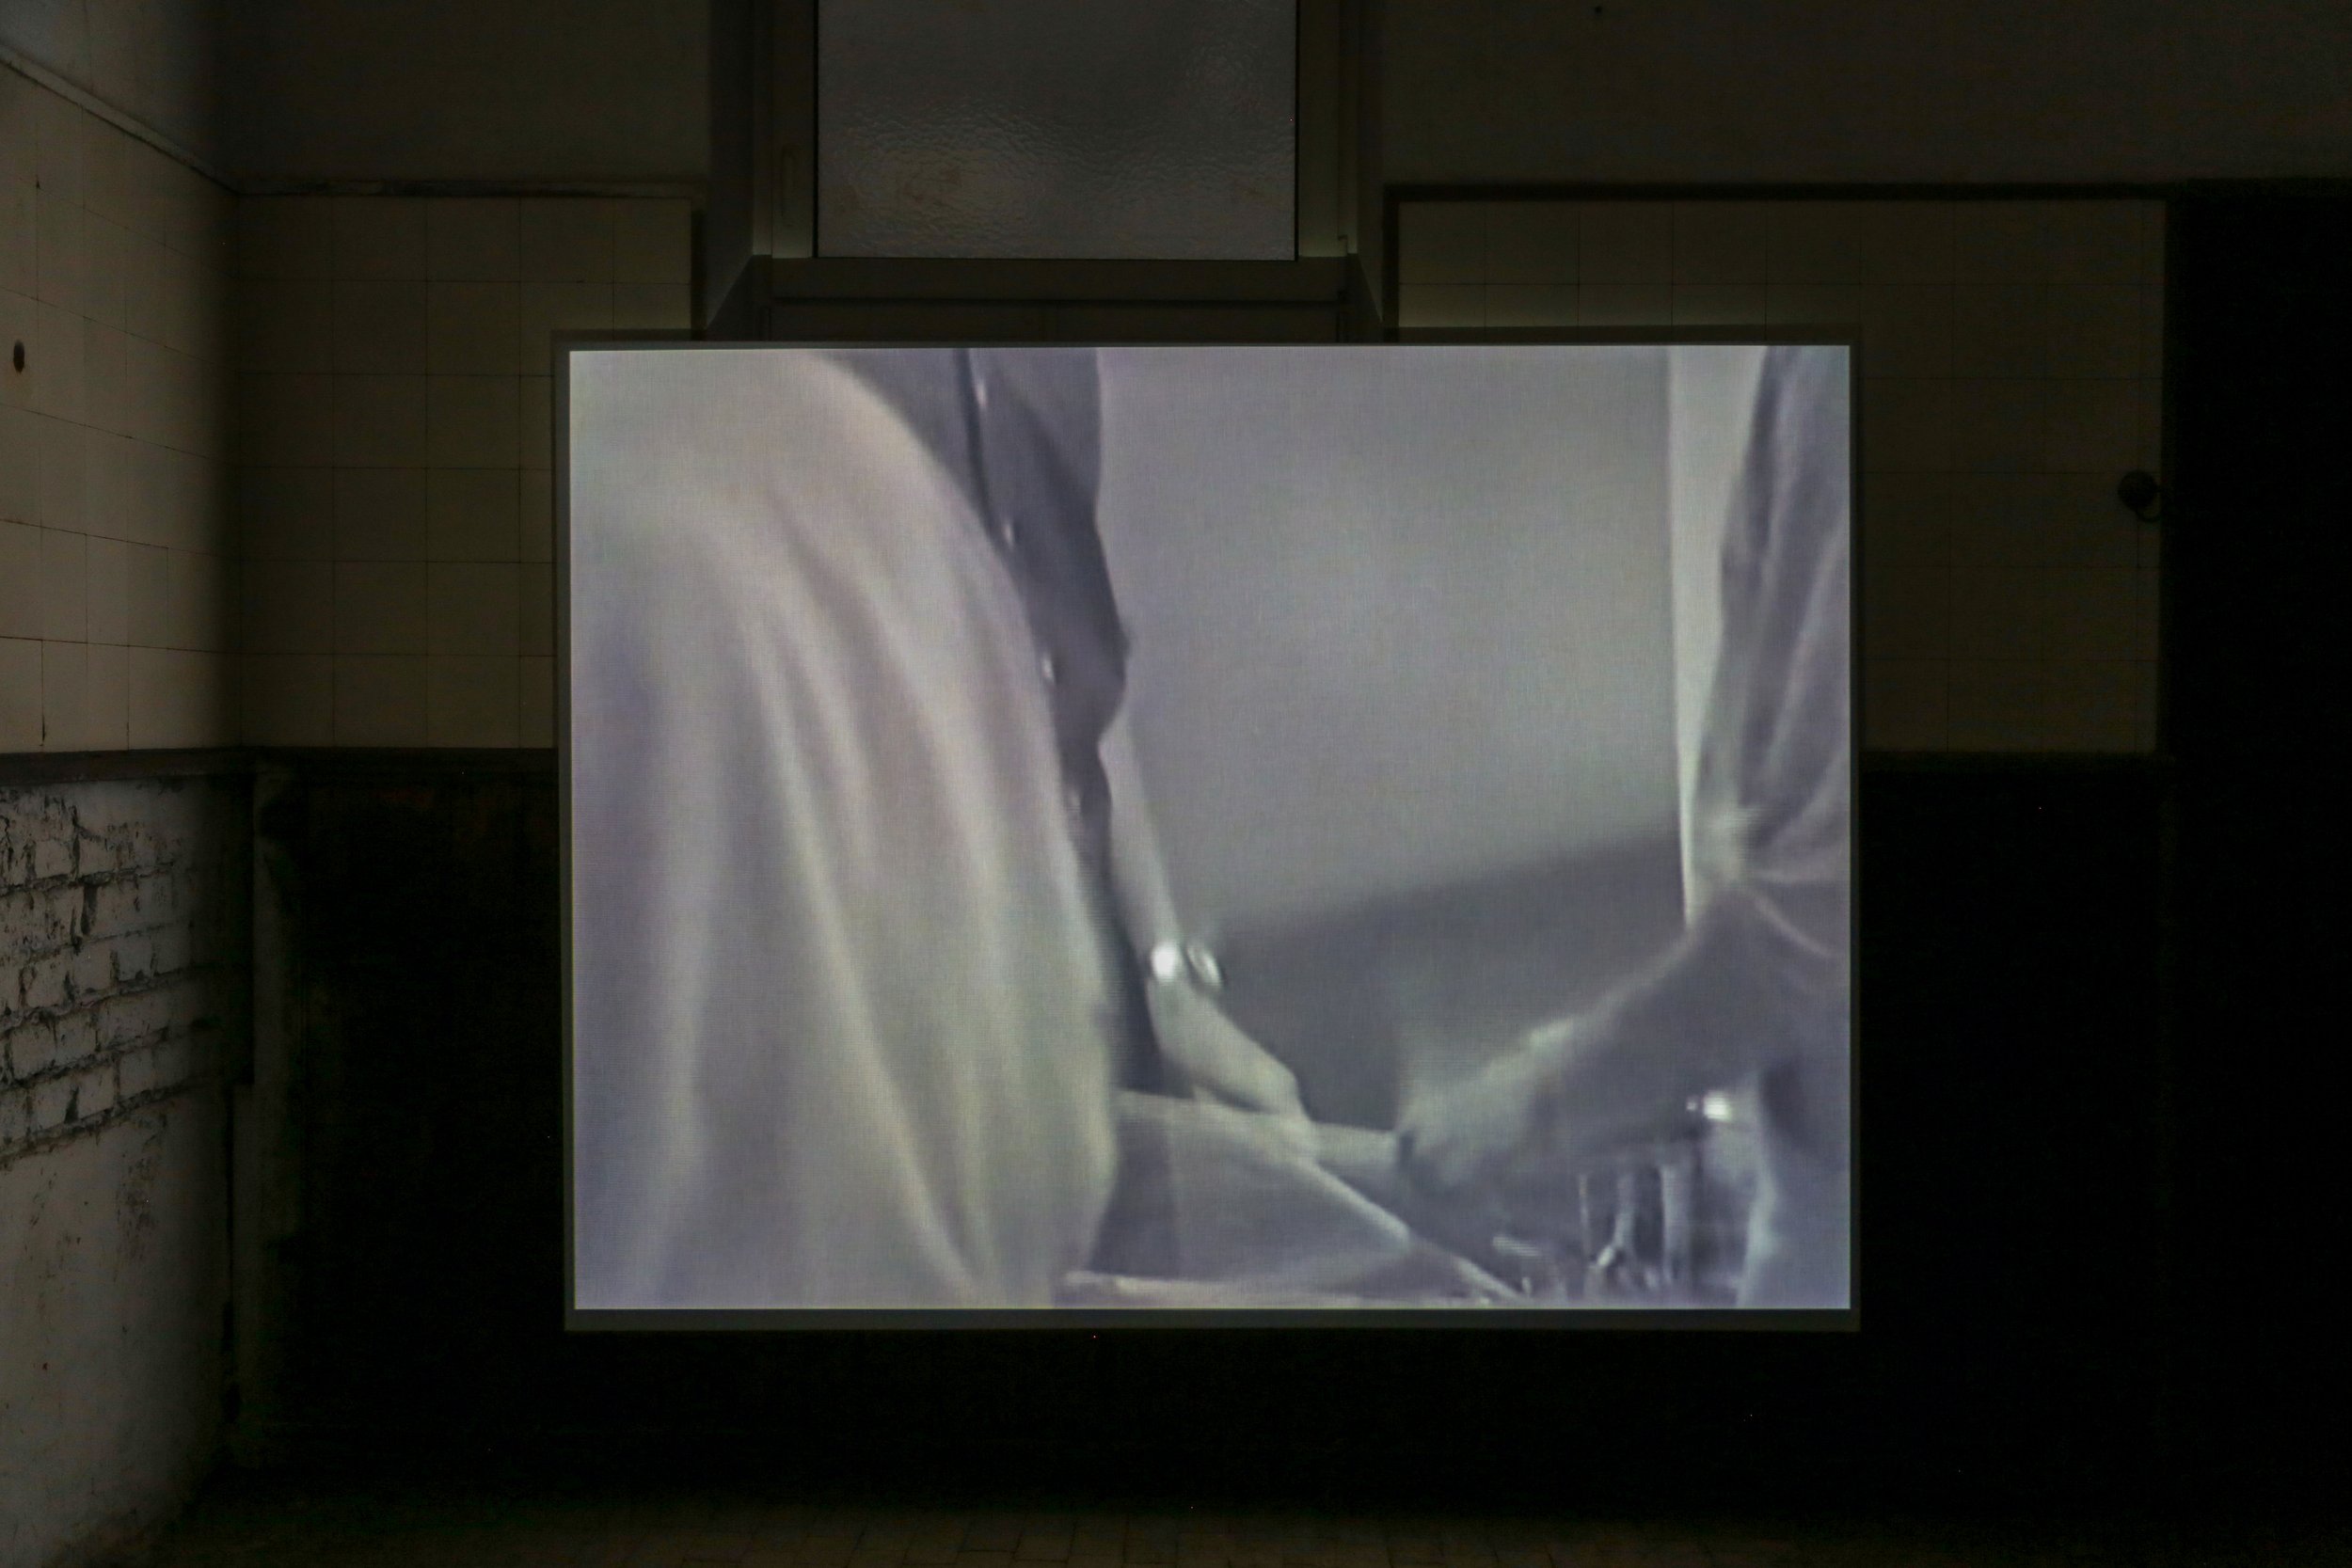   fig15 installation view Toine Horvers, Rolling, 1986 , 00:15:53., In collections: De Appel, LIMA  